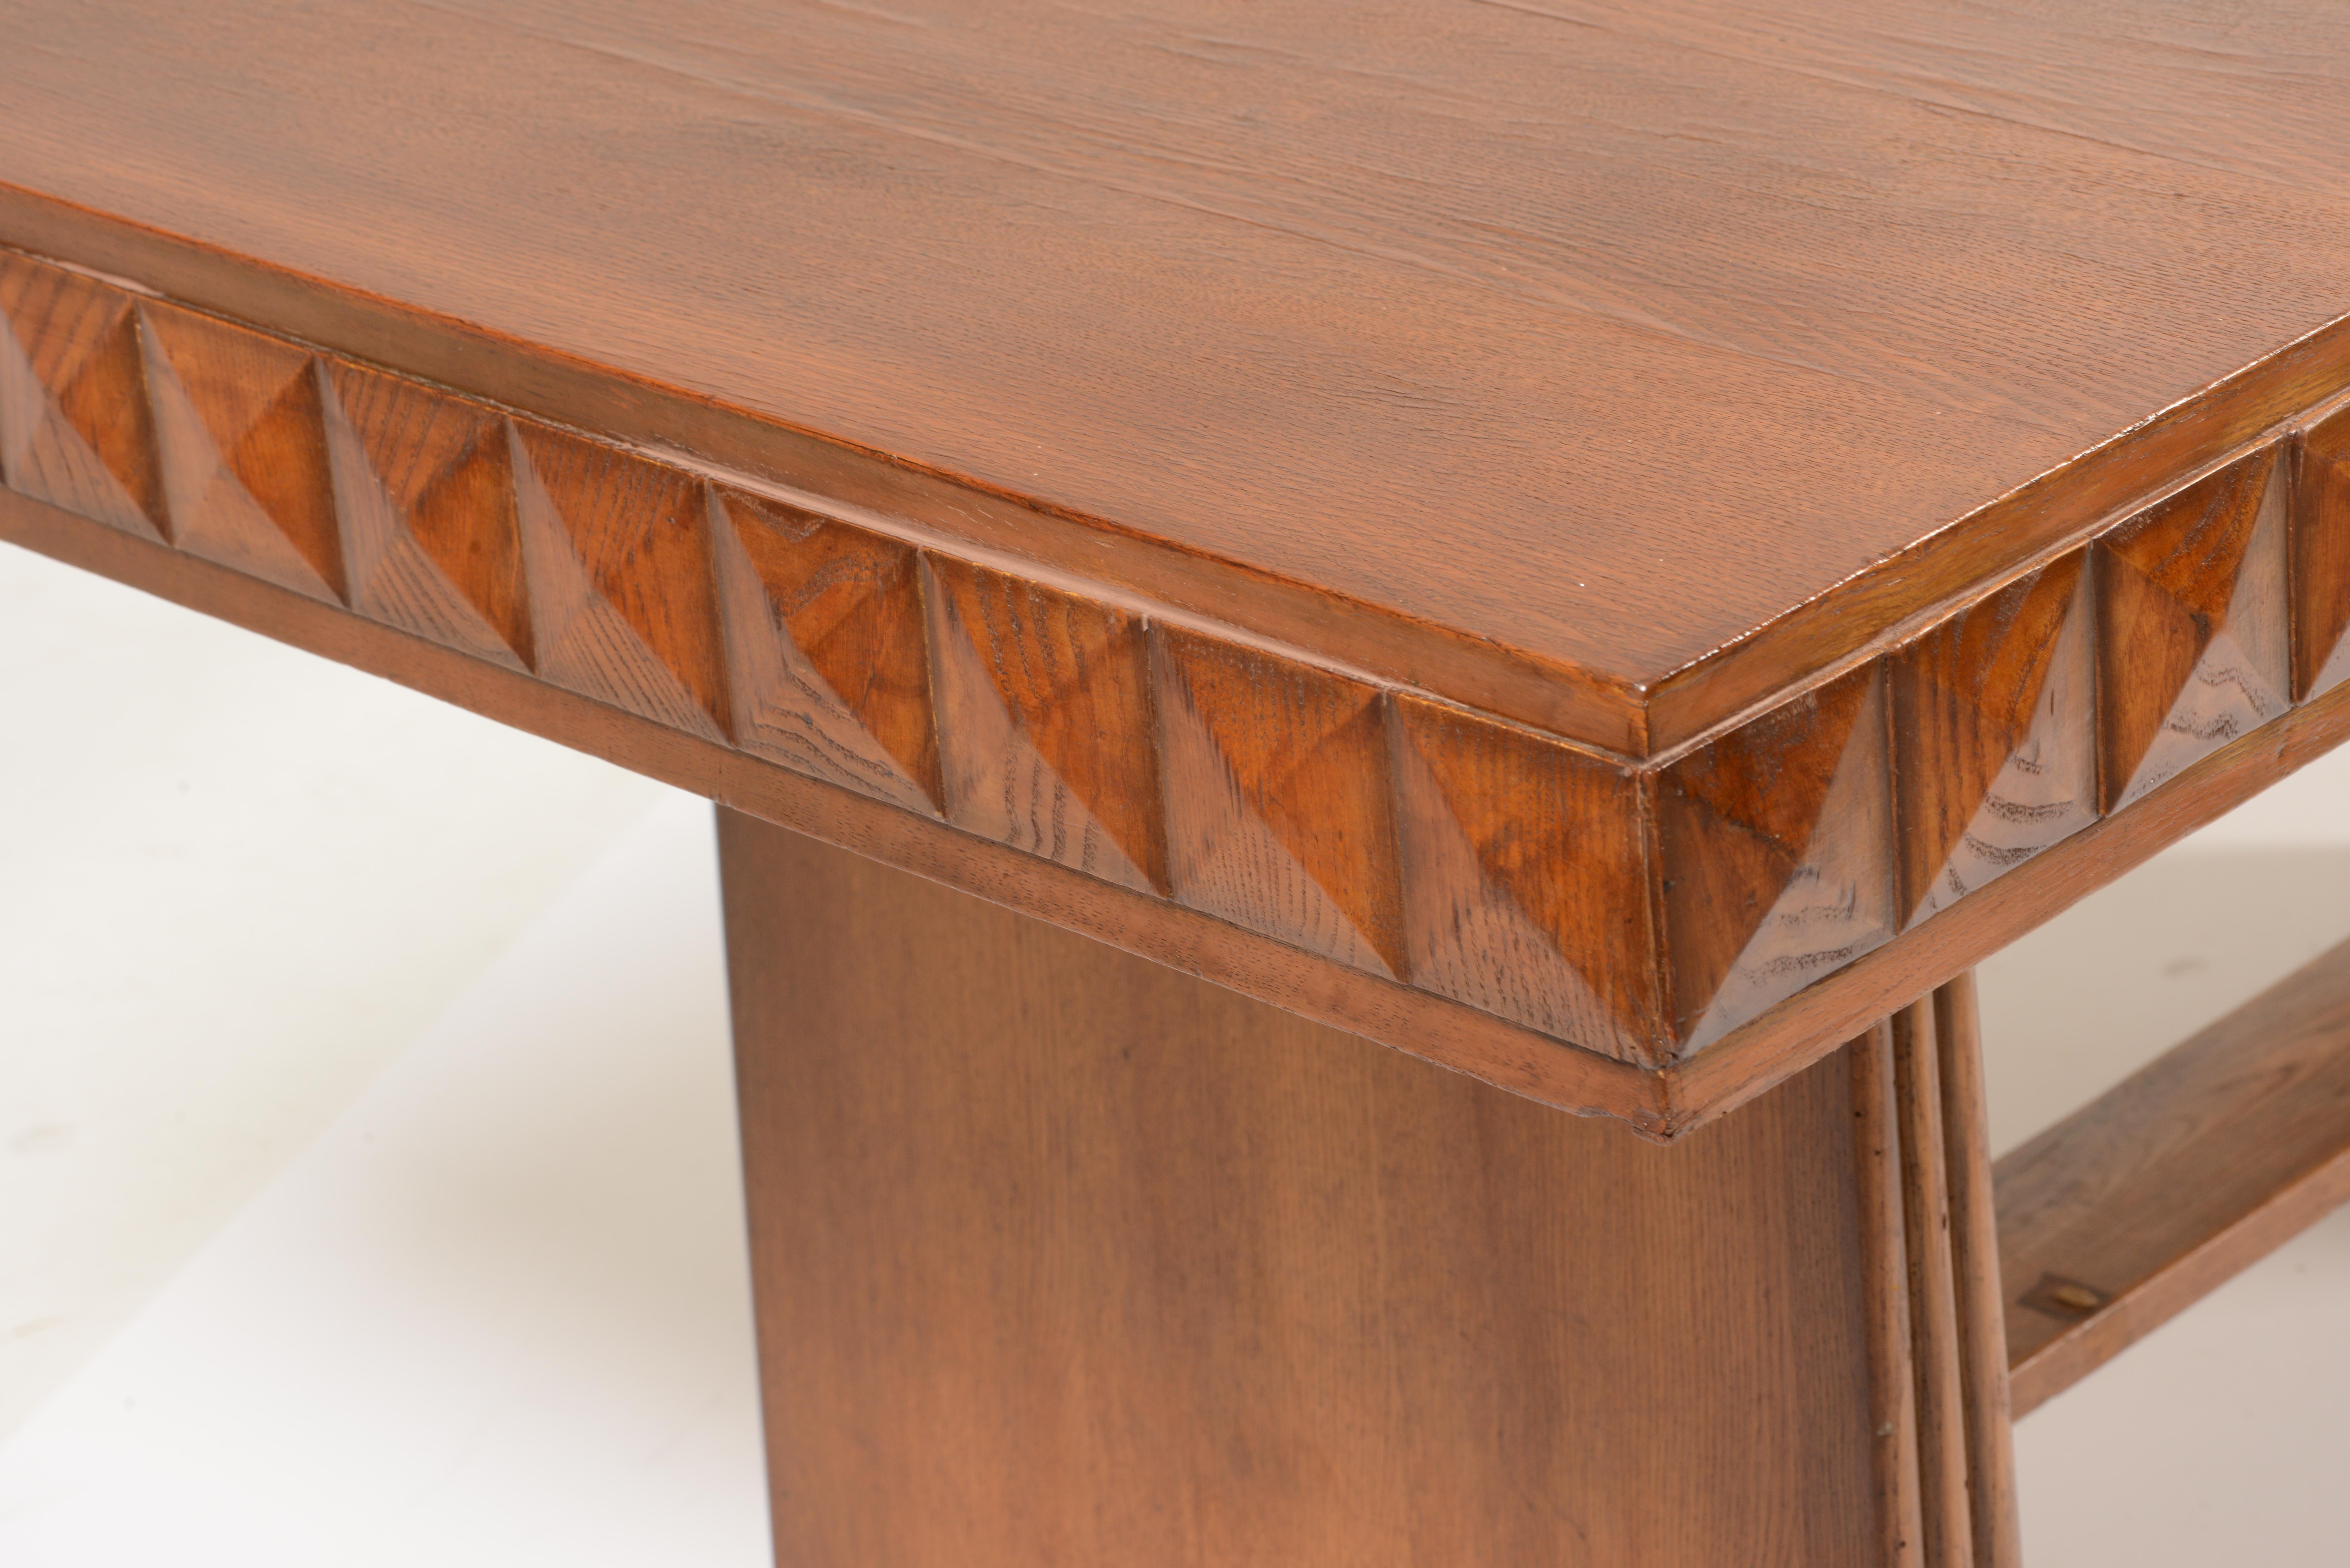 Table with Faceted Edge Motif and Fluted Panel Legs, Italy, 1940's For Sale 2